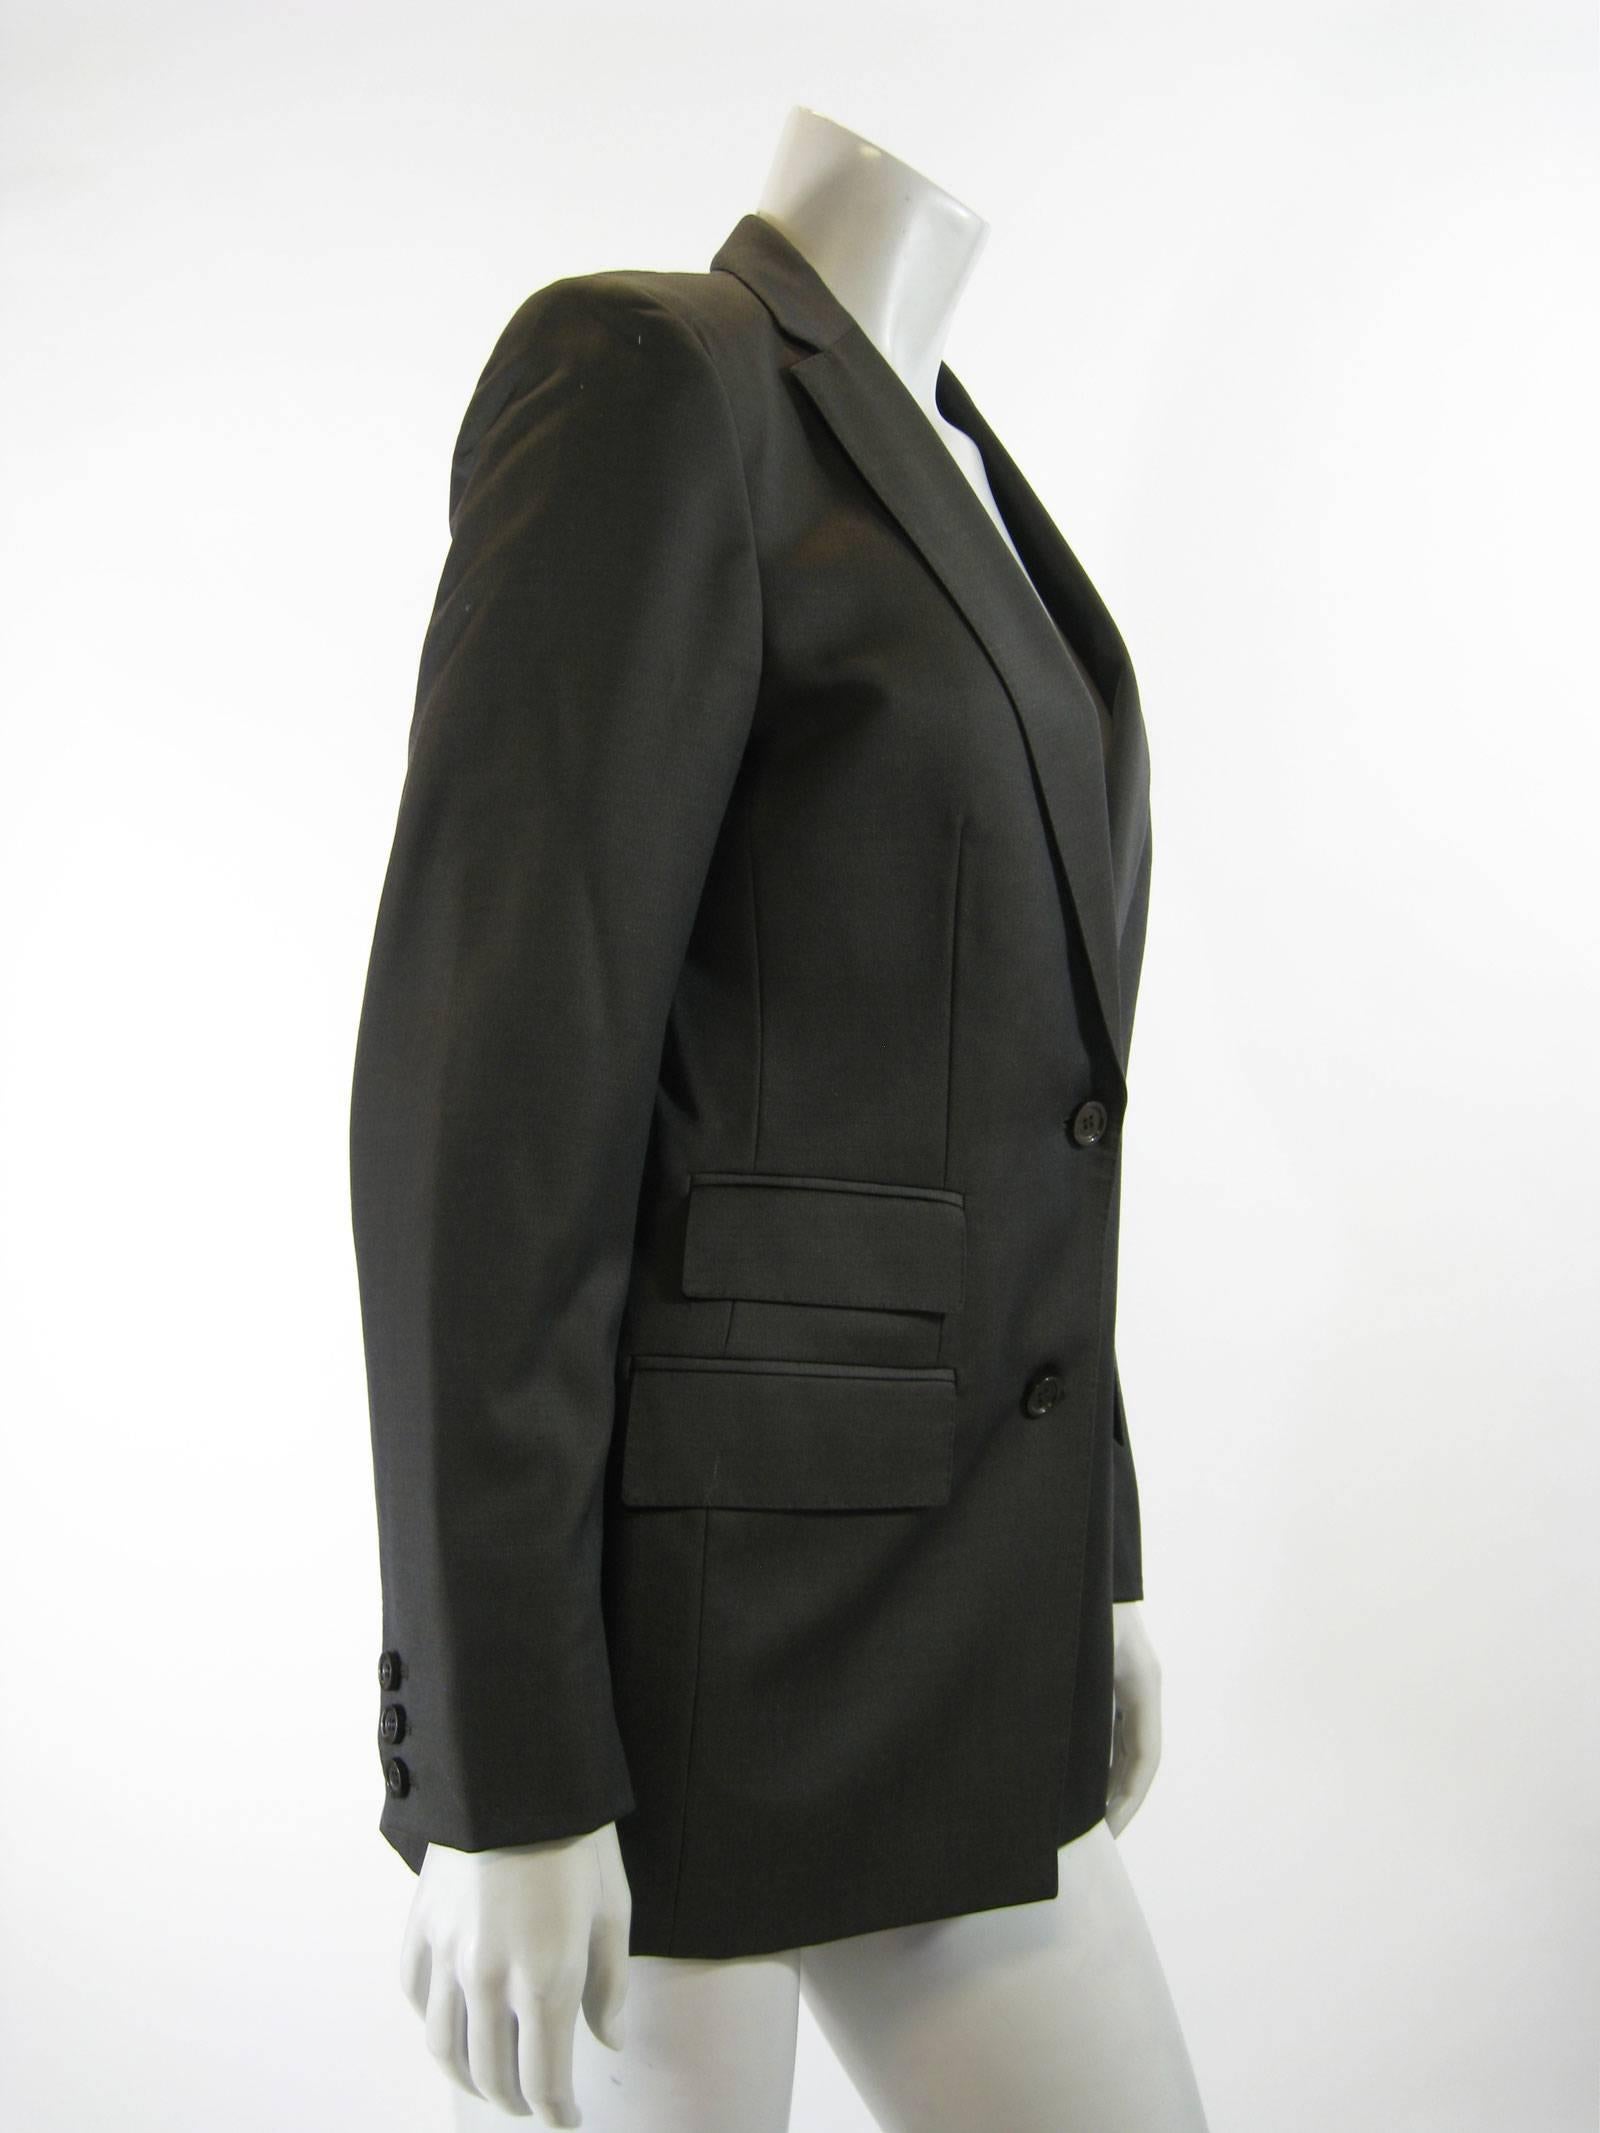 Menswear-inspired Gucci tailored jacket.
Chest pocket, two slant pockets on  right hip, one left.
Two button closure.
Three button detailing on cuffs.
Lined.
Tagged a size 40.

Chest: 34